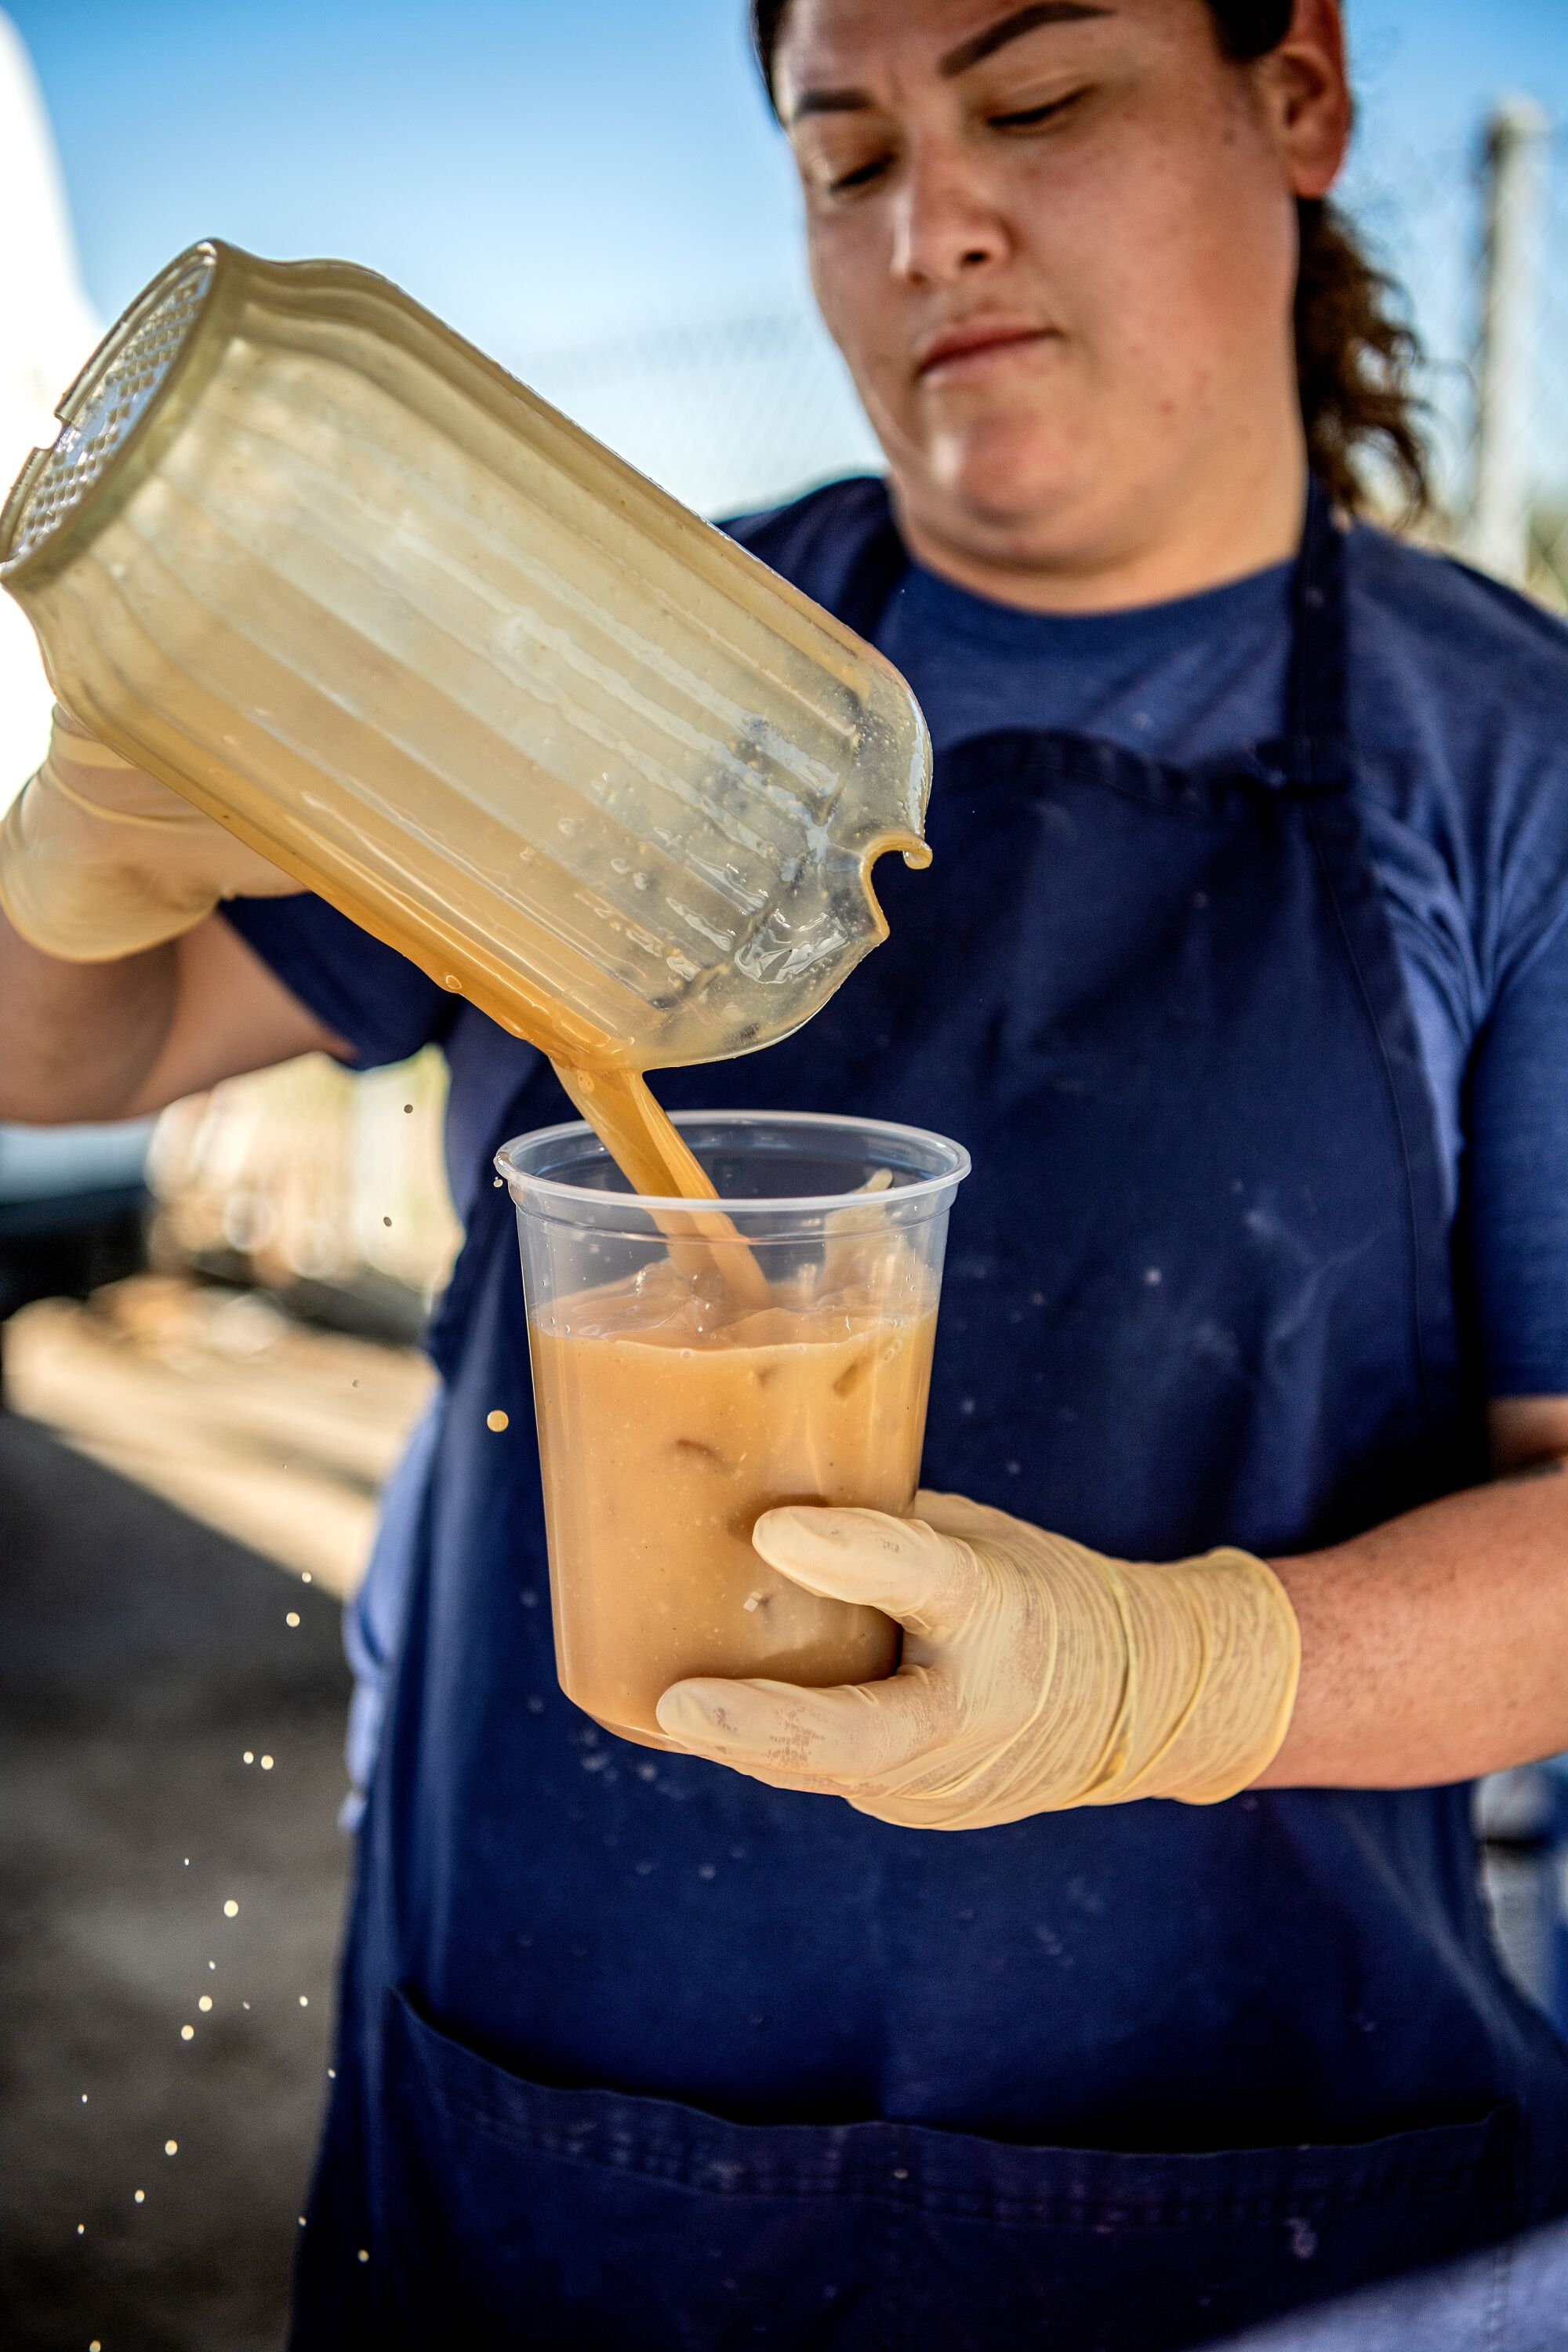 A woman pours tejuino from a pitcher into a cup.